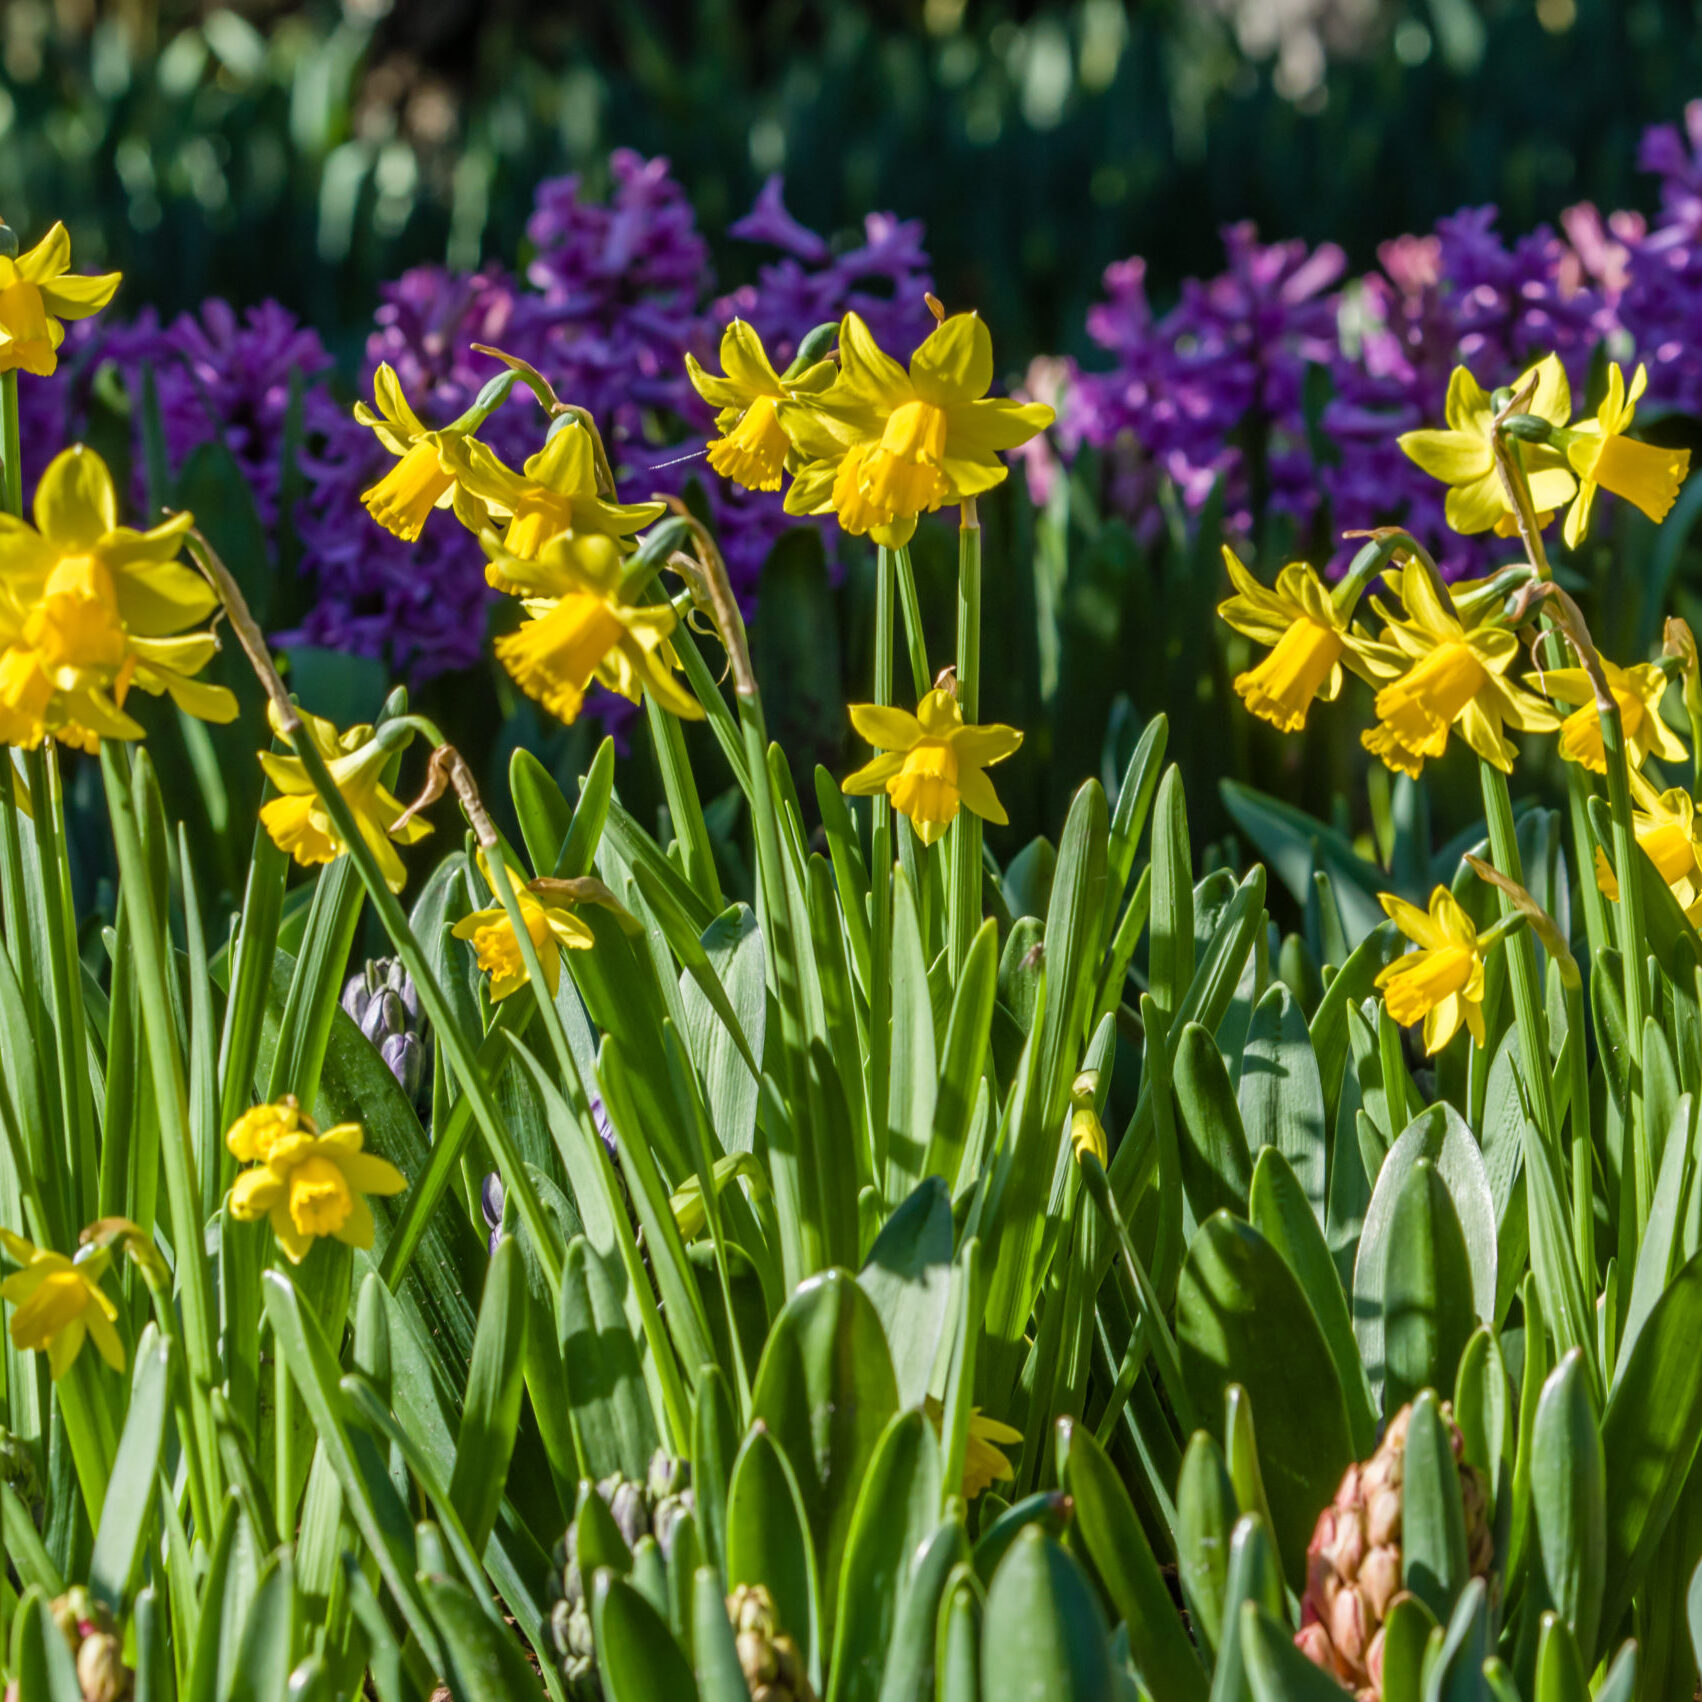 Daffodil Tete a Tete flowers blooming in a garden setting